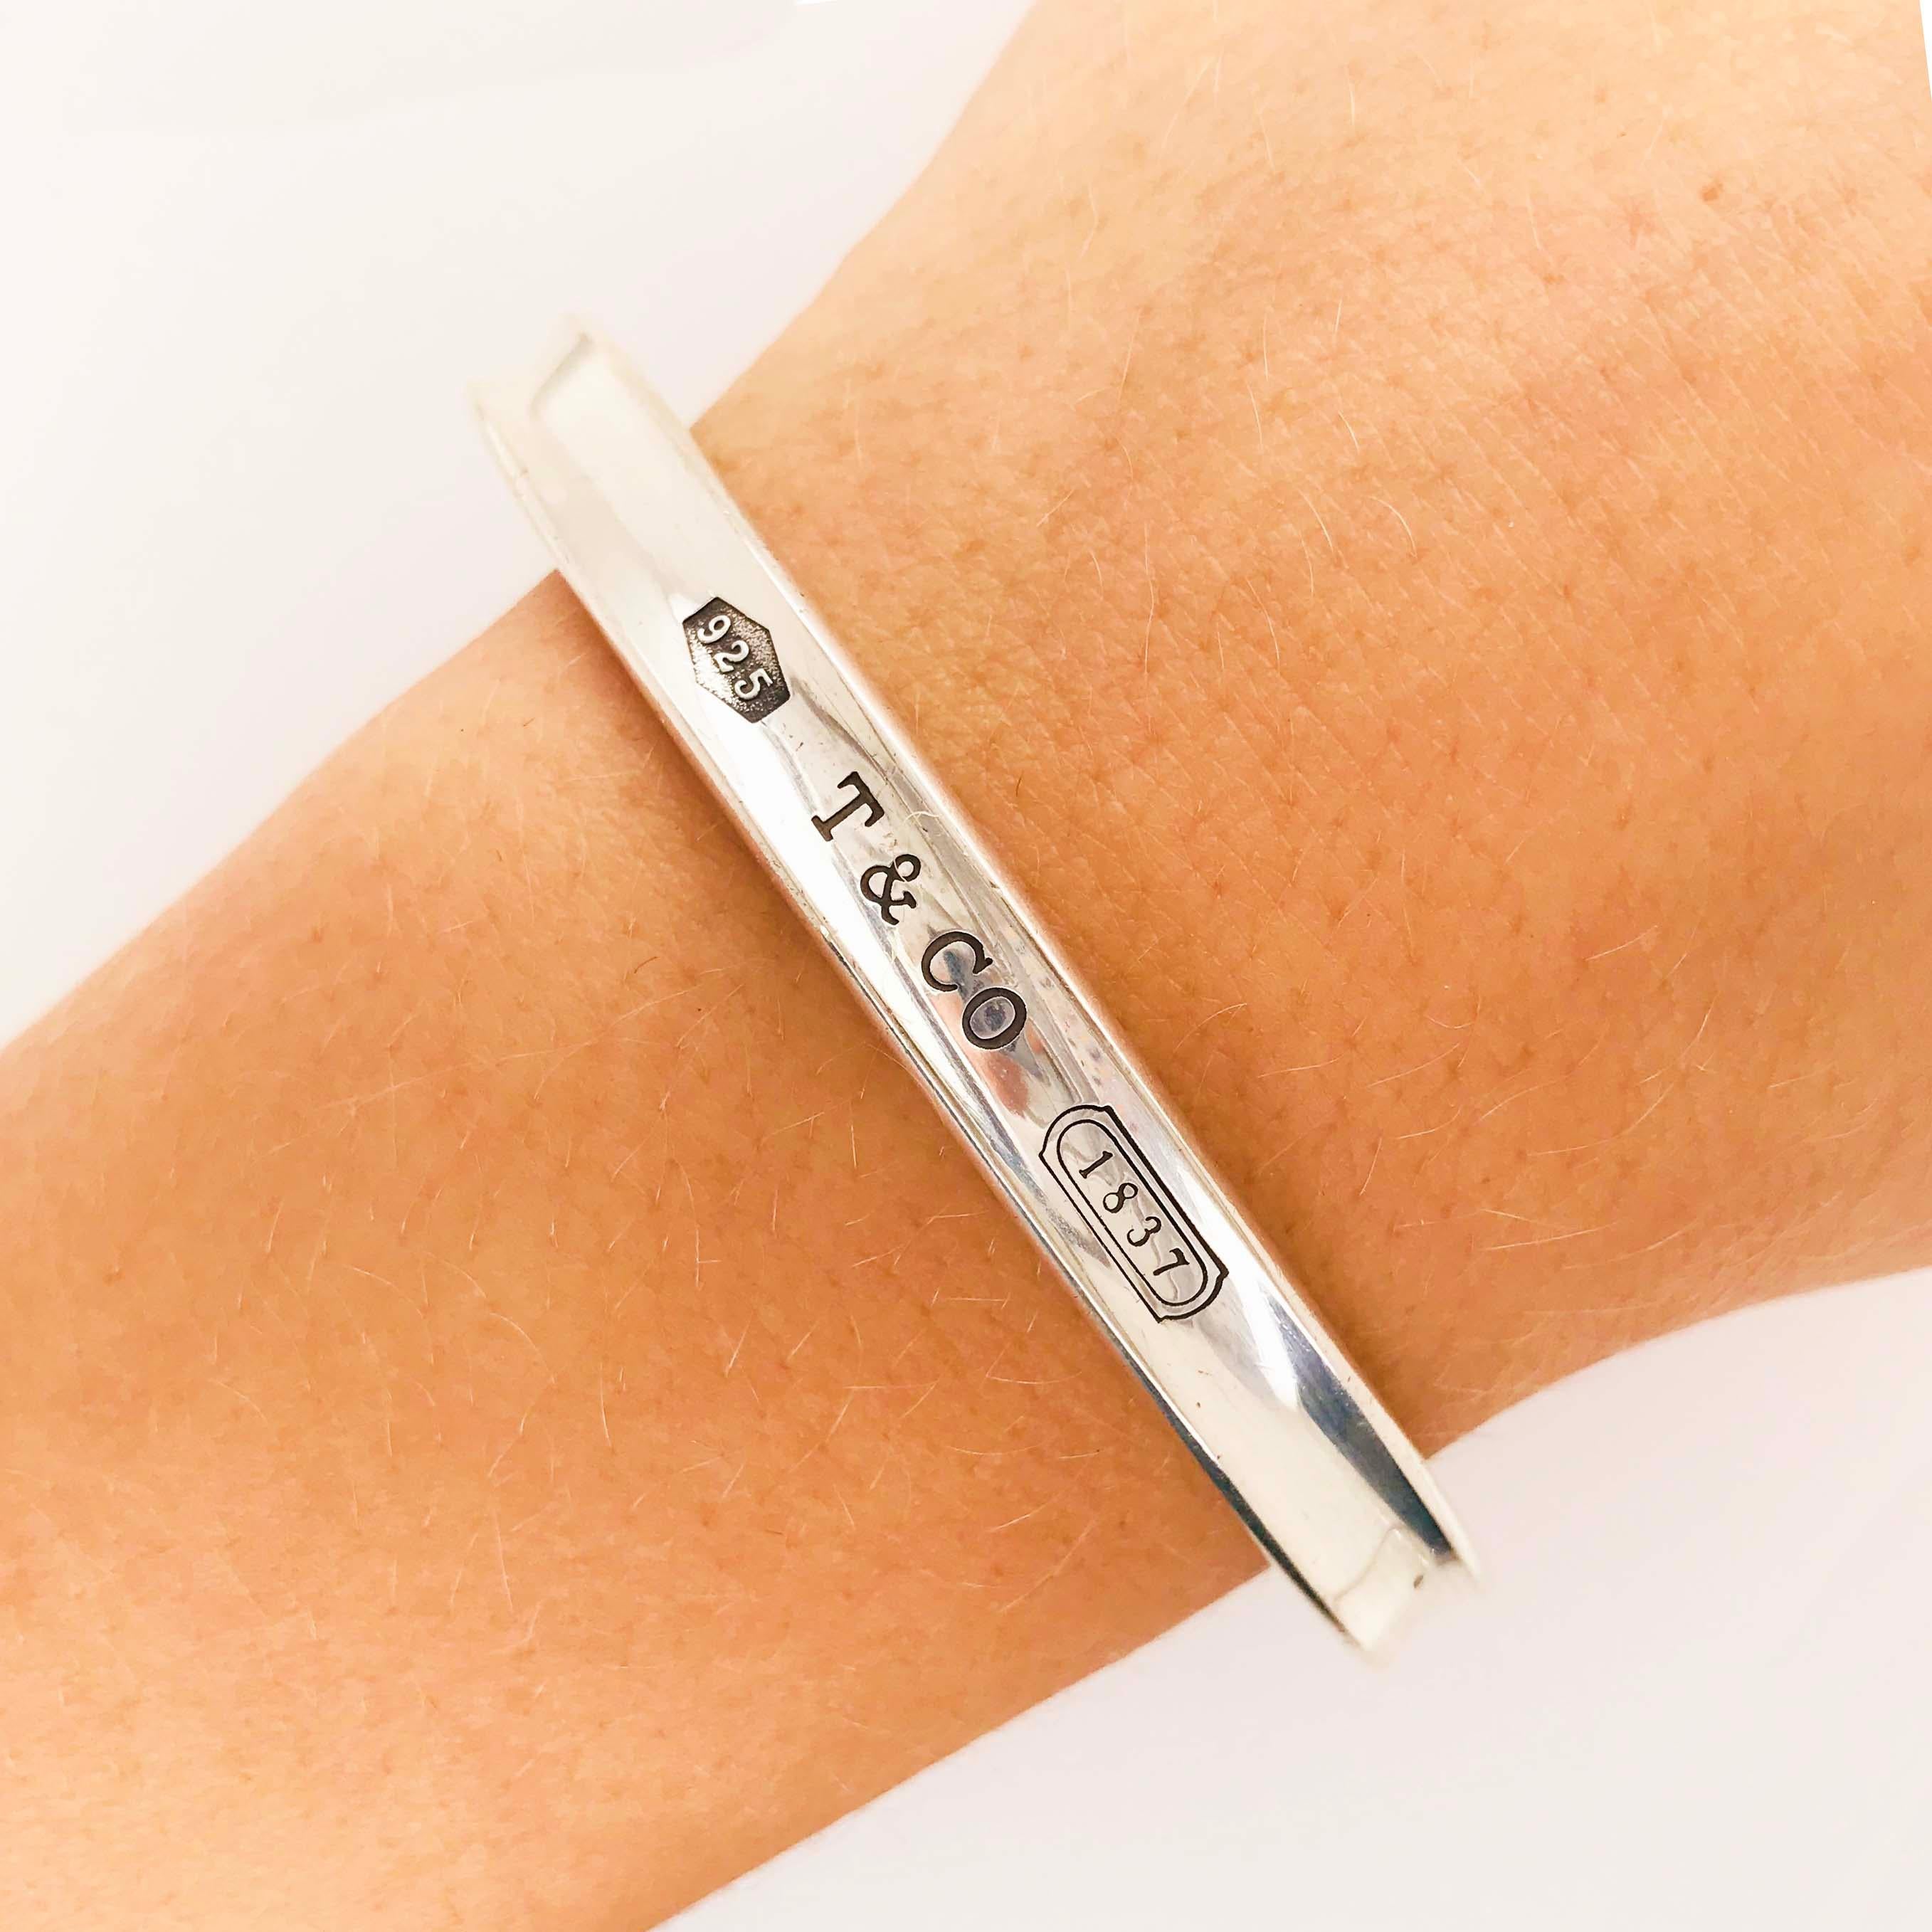 This gorgeous sterling silver bangle bracelet is an original, authentic Tiffany & Co. bangle bracelet. The bangle bracelet is an original 1997 Tiffany & Co.  from the Tiffany & Co. 1837 collection and is a concave design with a sleek, classic